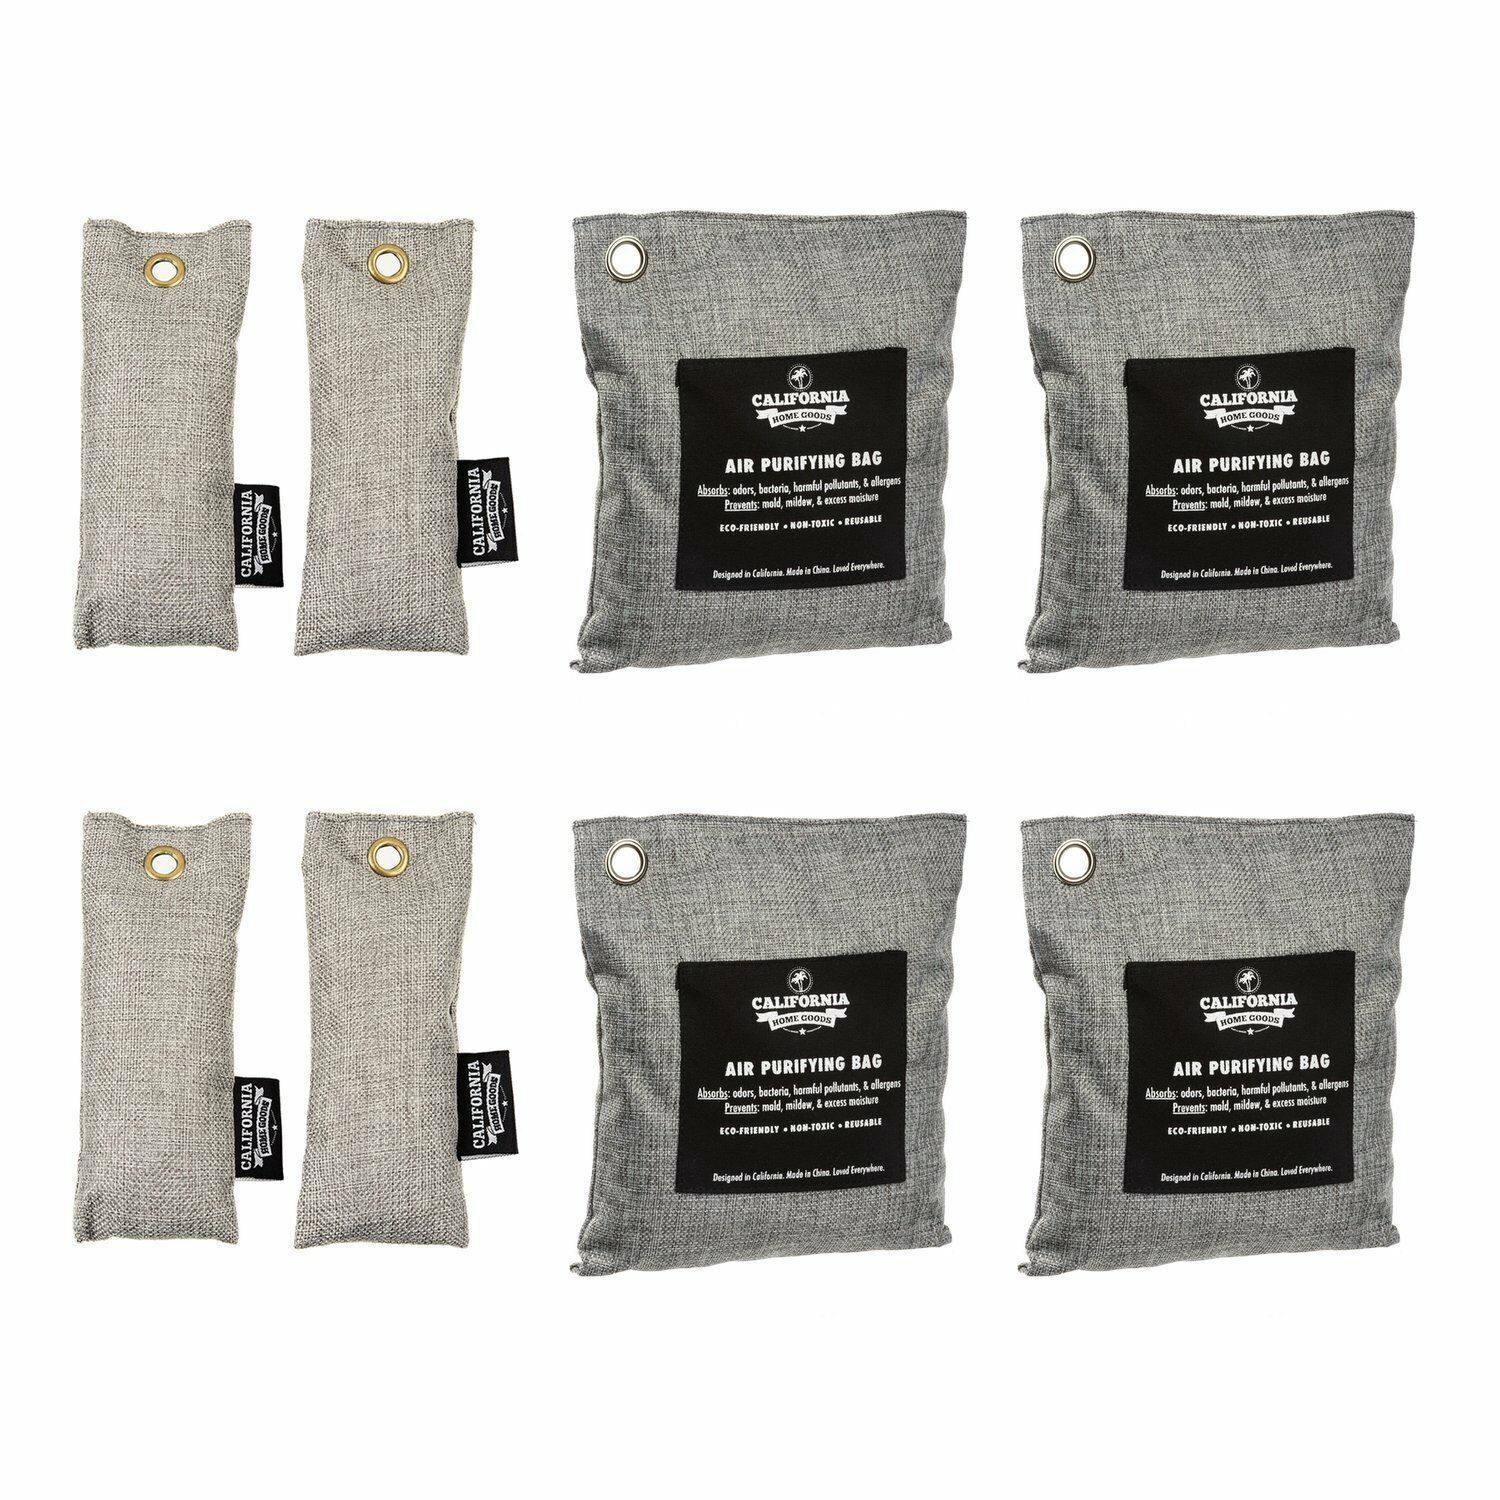 8 Activated Air Purifying Charcoal Bamboo Freshener Deodorizer Dehumidifier Bags California Home Goods